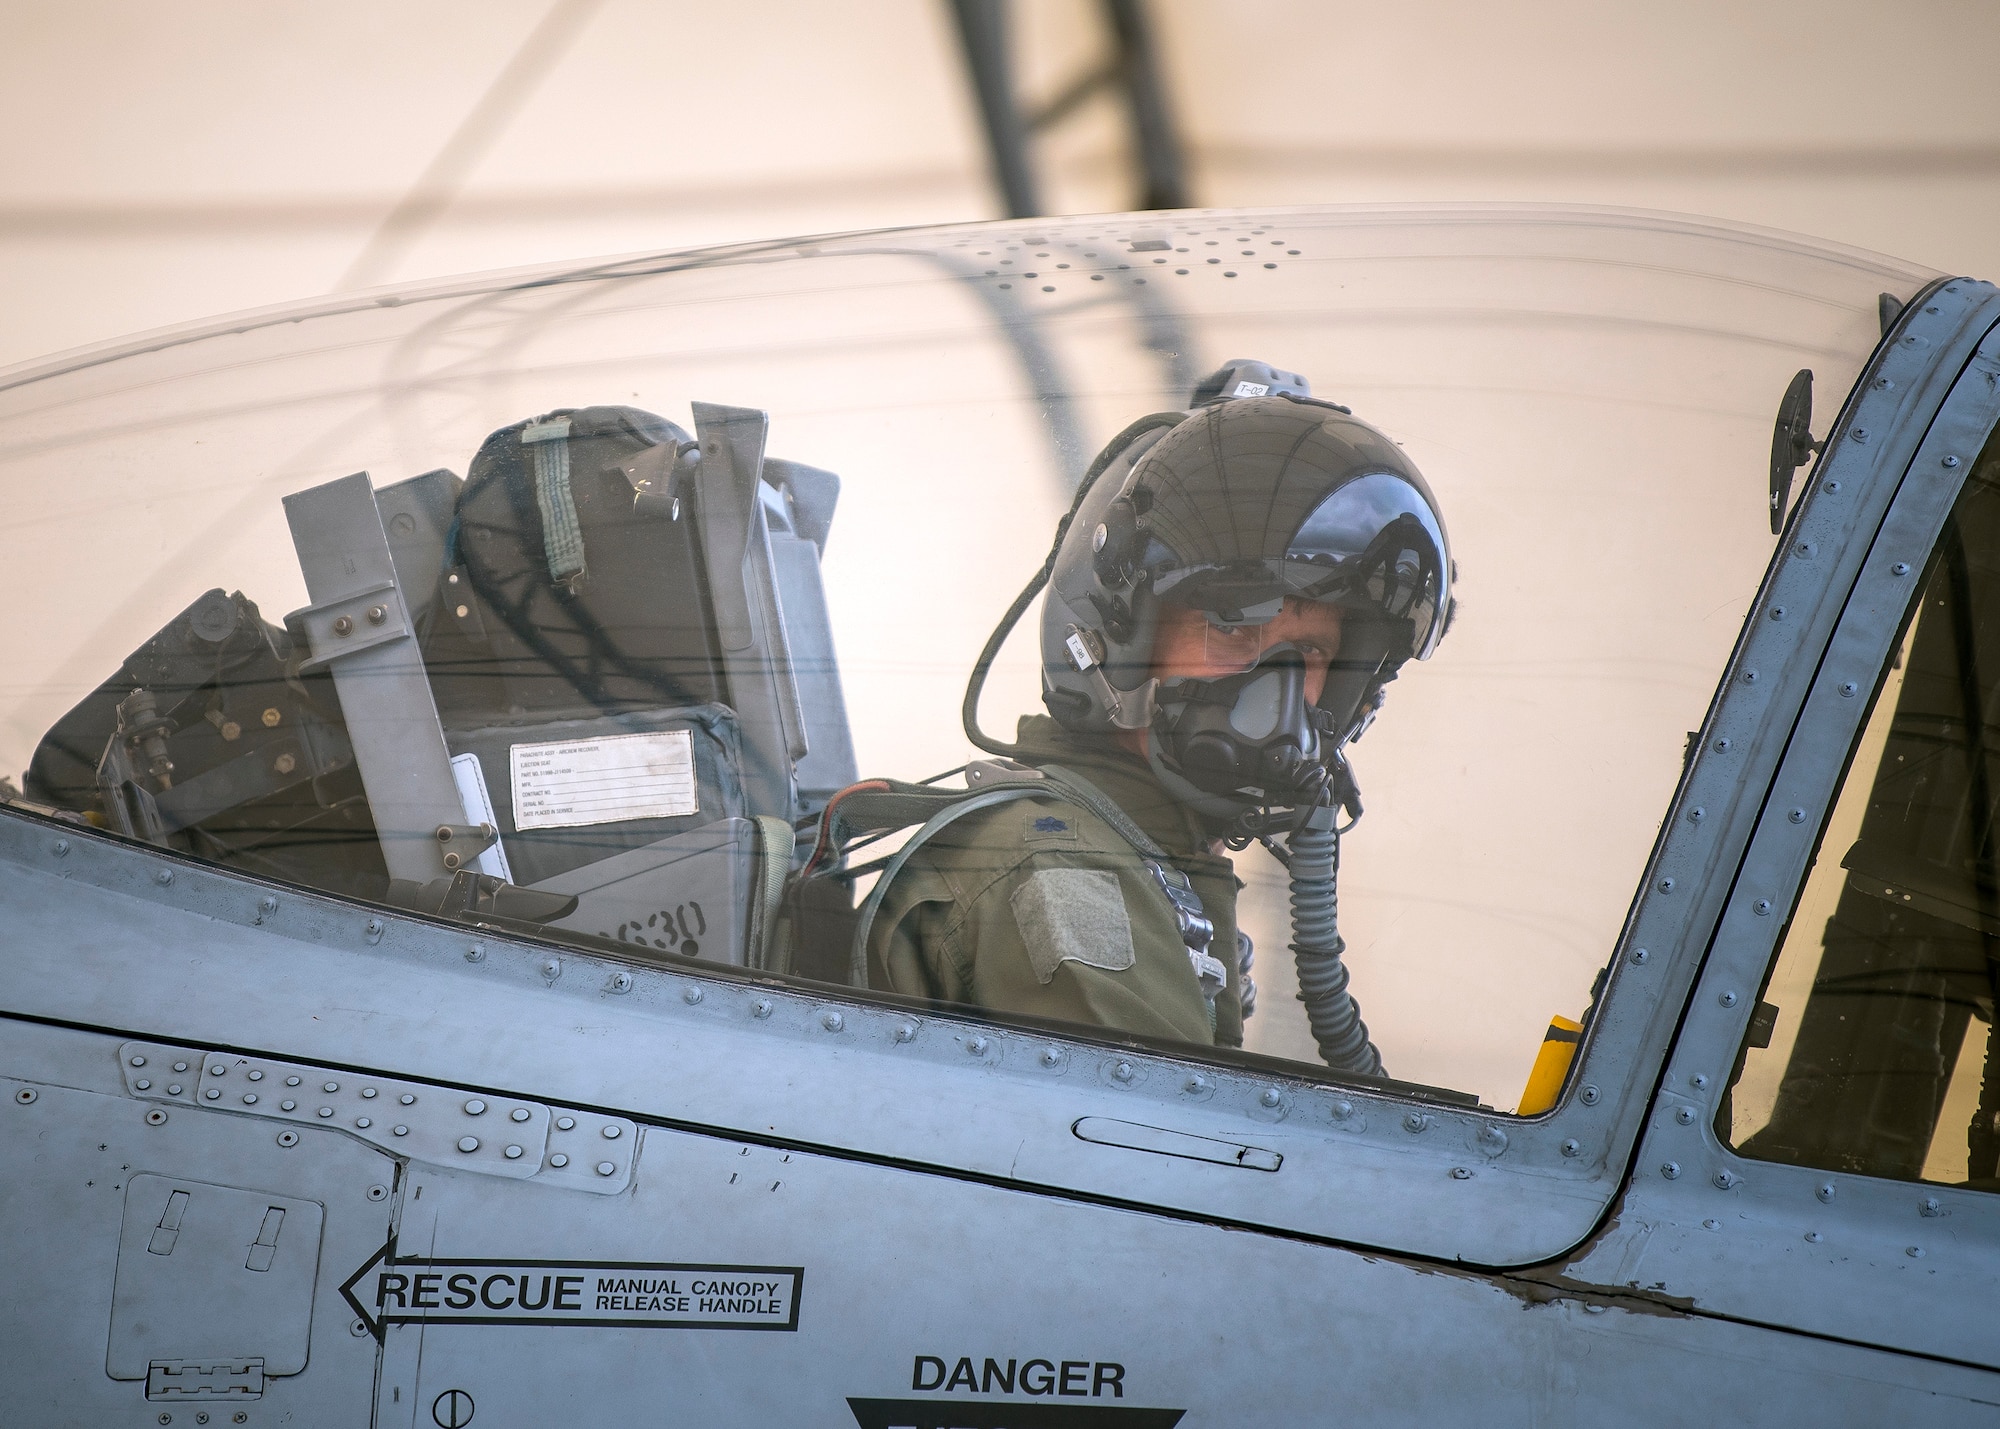 Lt. Col. Jeremy Johnston, 75th Fighter Squadron assistant director of operations, prepares to taxi an A-10C Thunderbolt II during a sortie surge exercise, July 24, 2019, at Moody Air Force Base, Ga. The exercise was conducted to determine Airmen's abilities to perform effectively while generating combat or training sorties at an accelerated rate. Throughout the four-day surge, pilots and maintainers completed 131 sorties spanning approximately 152 flying hours. (U.S. Air Force photo by Airman 1st Class Eugene Oliver)